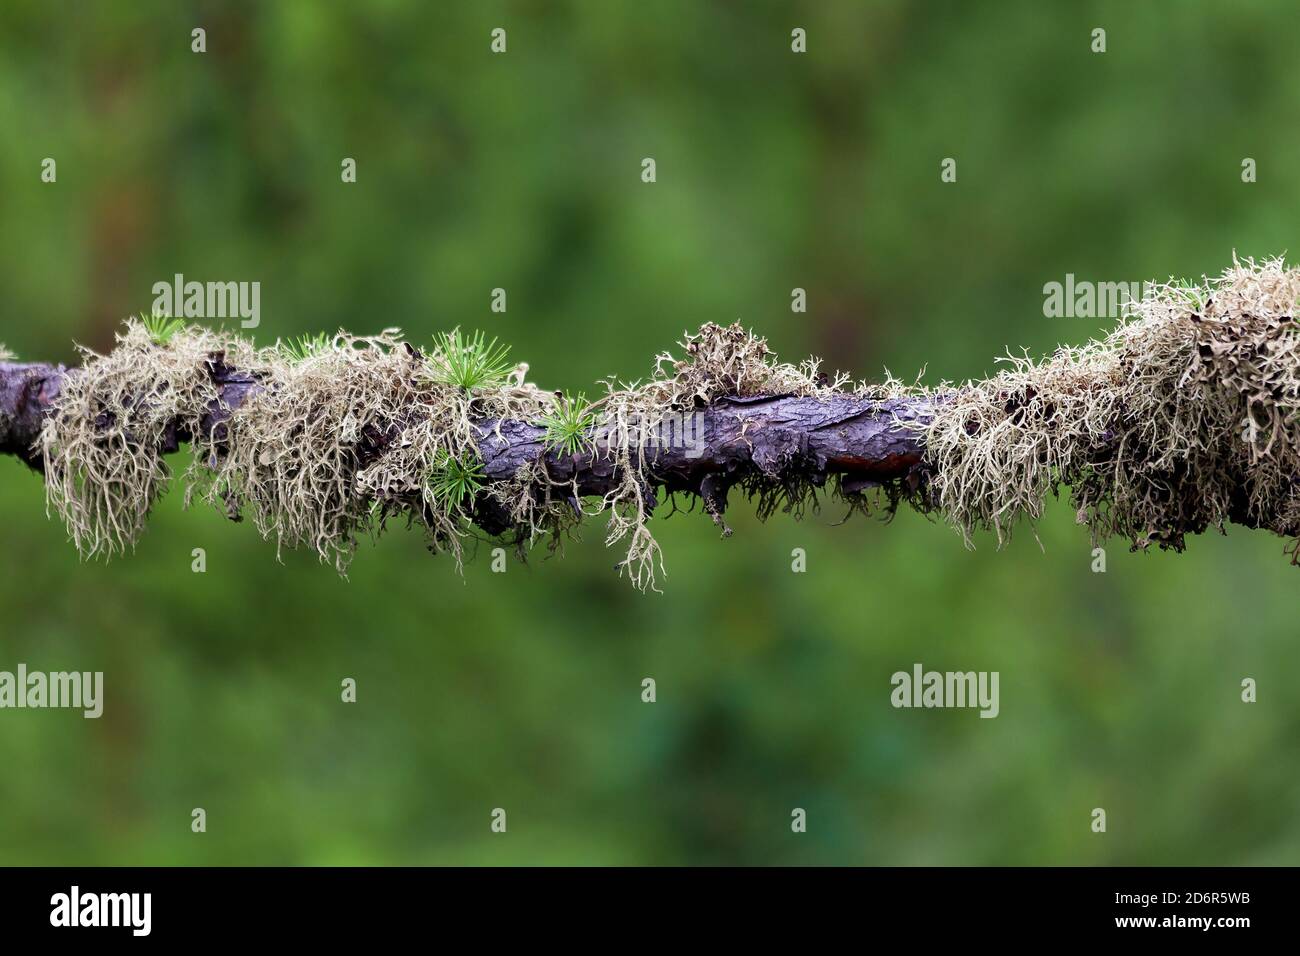 Lichens on a larch branch, close up on a green blurred background Stock Photo